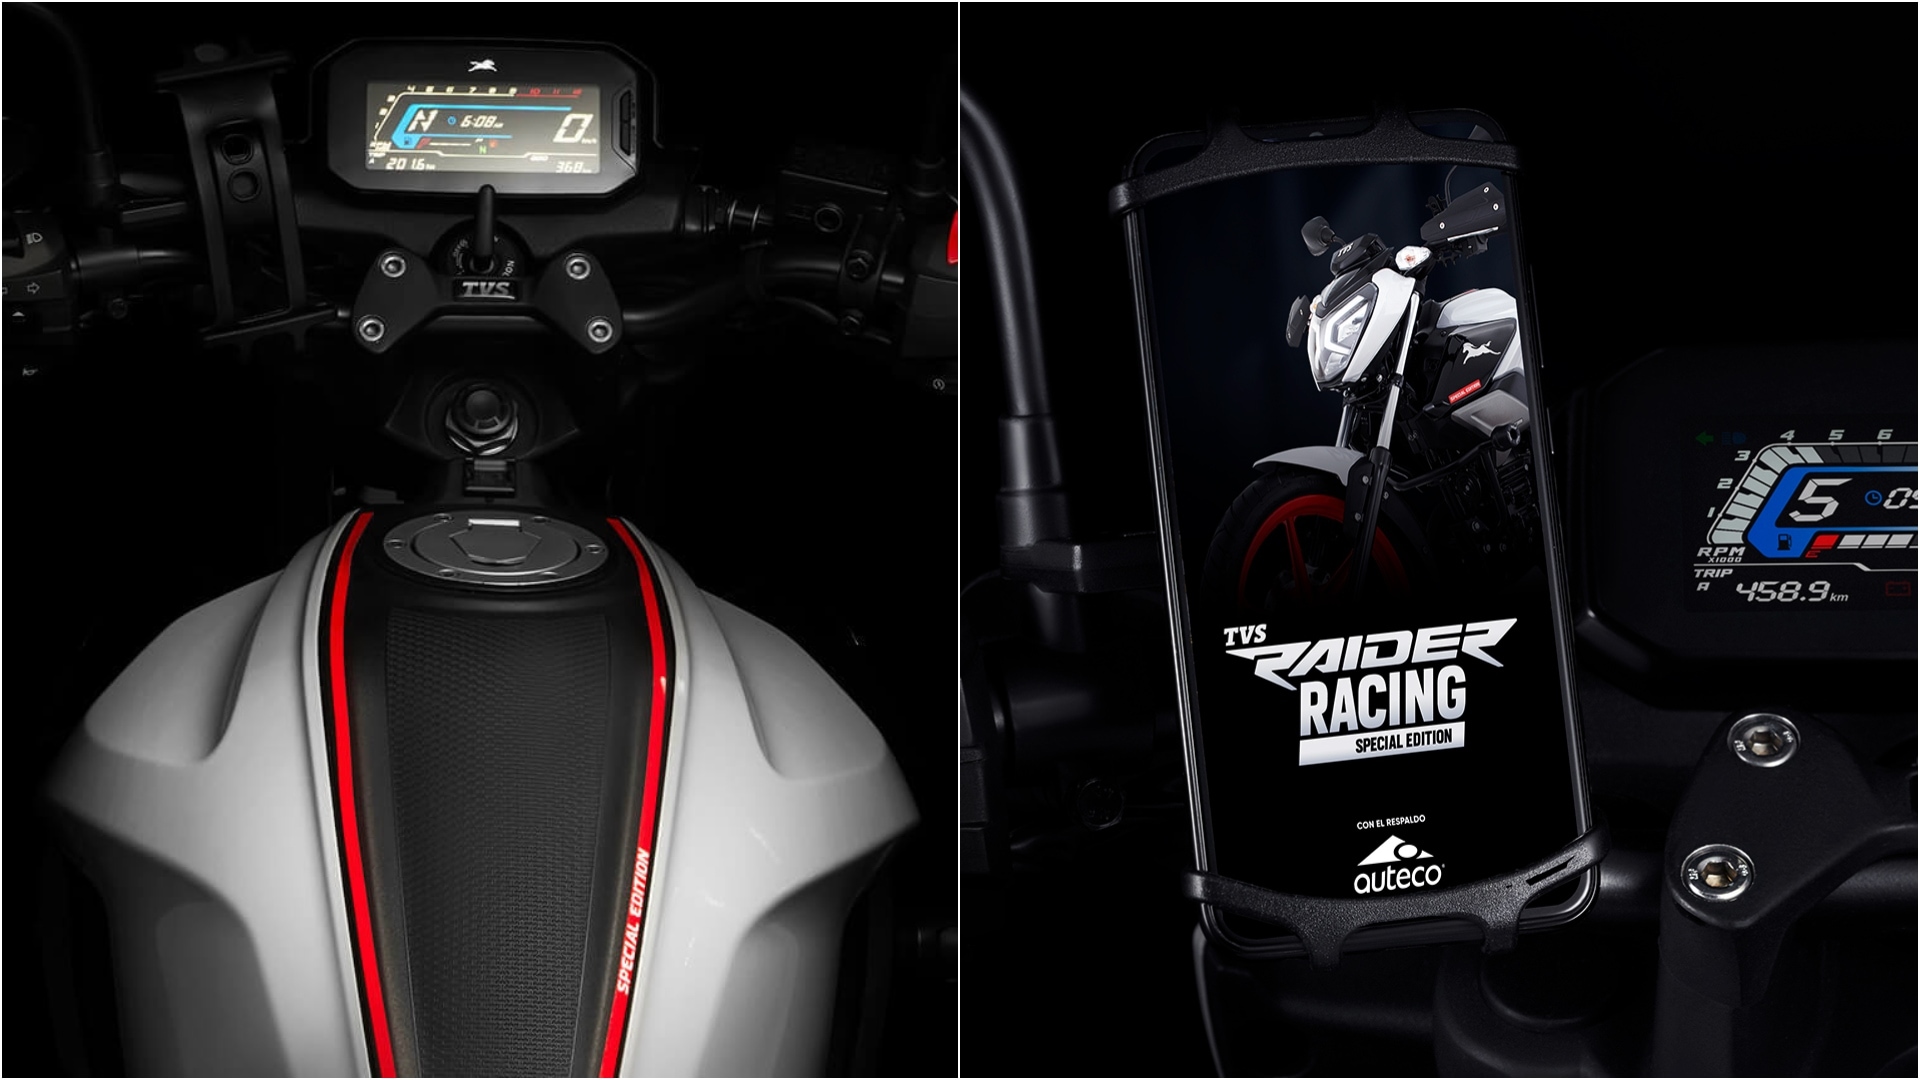 The TVS Raider 125 Racing special edition uses the same 125 cc engine, 12.5 bhp and 11.5 Nm, mated to a 5-speed gearbox